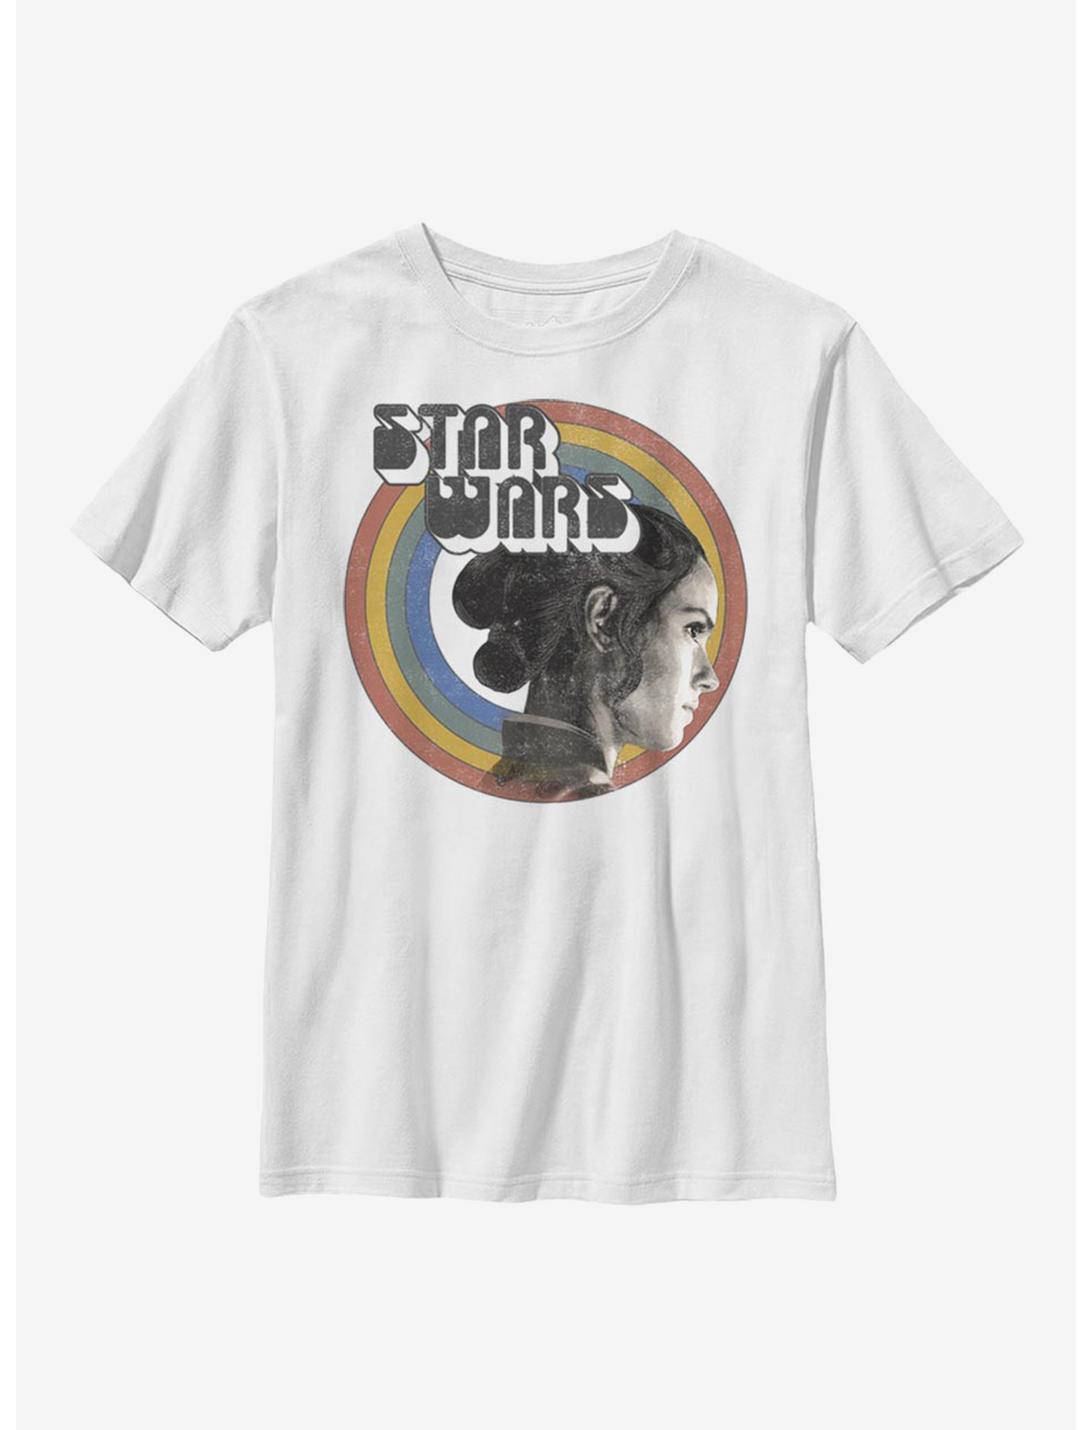 Star Wars Episode IX The Rise Of Skywalker Vintage Rey Rainbow Youth T-Shirt, WHITE, hi-res